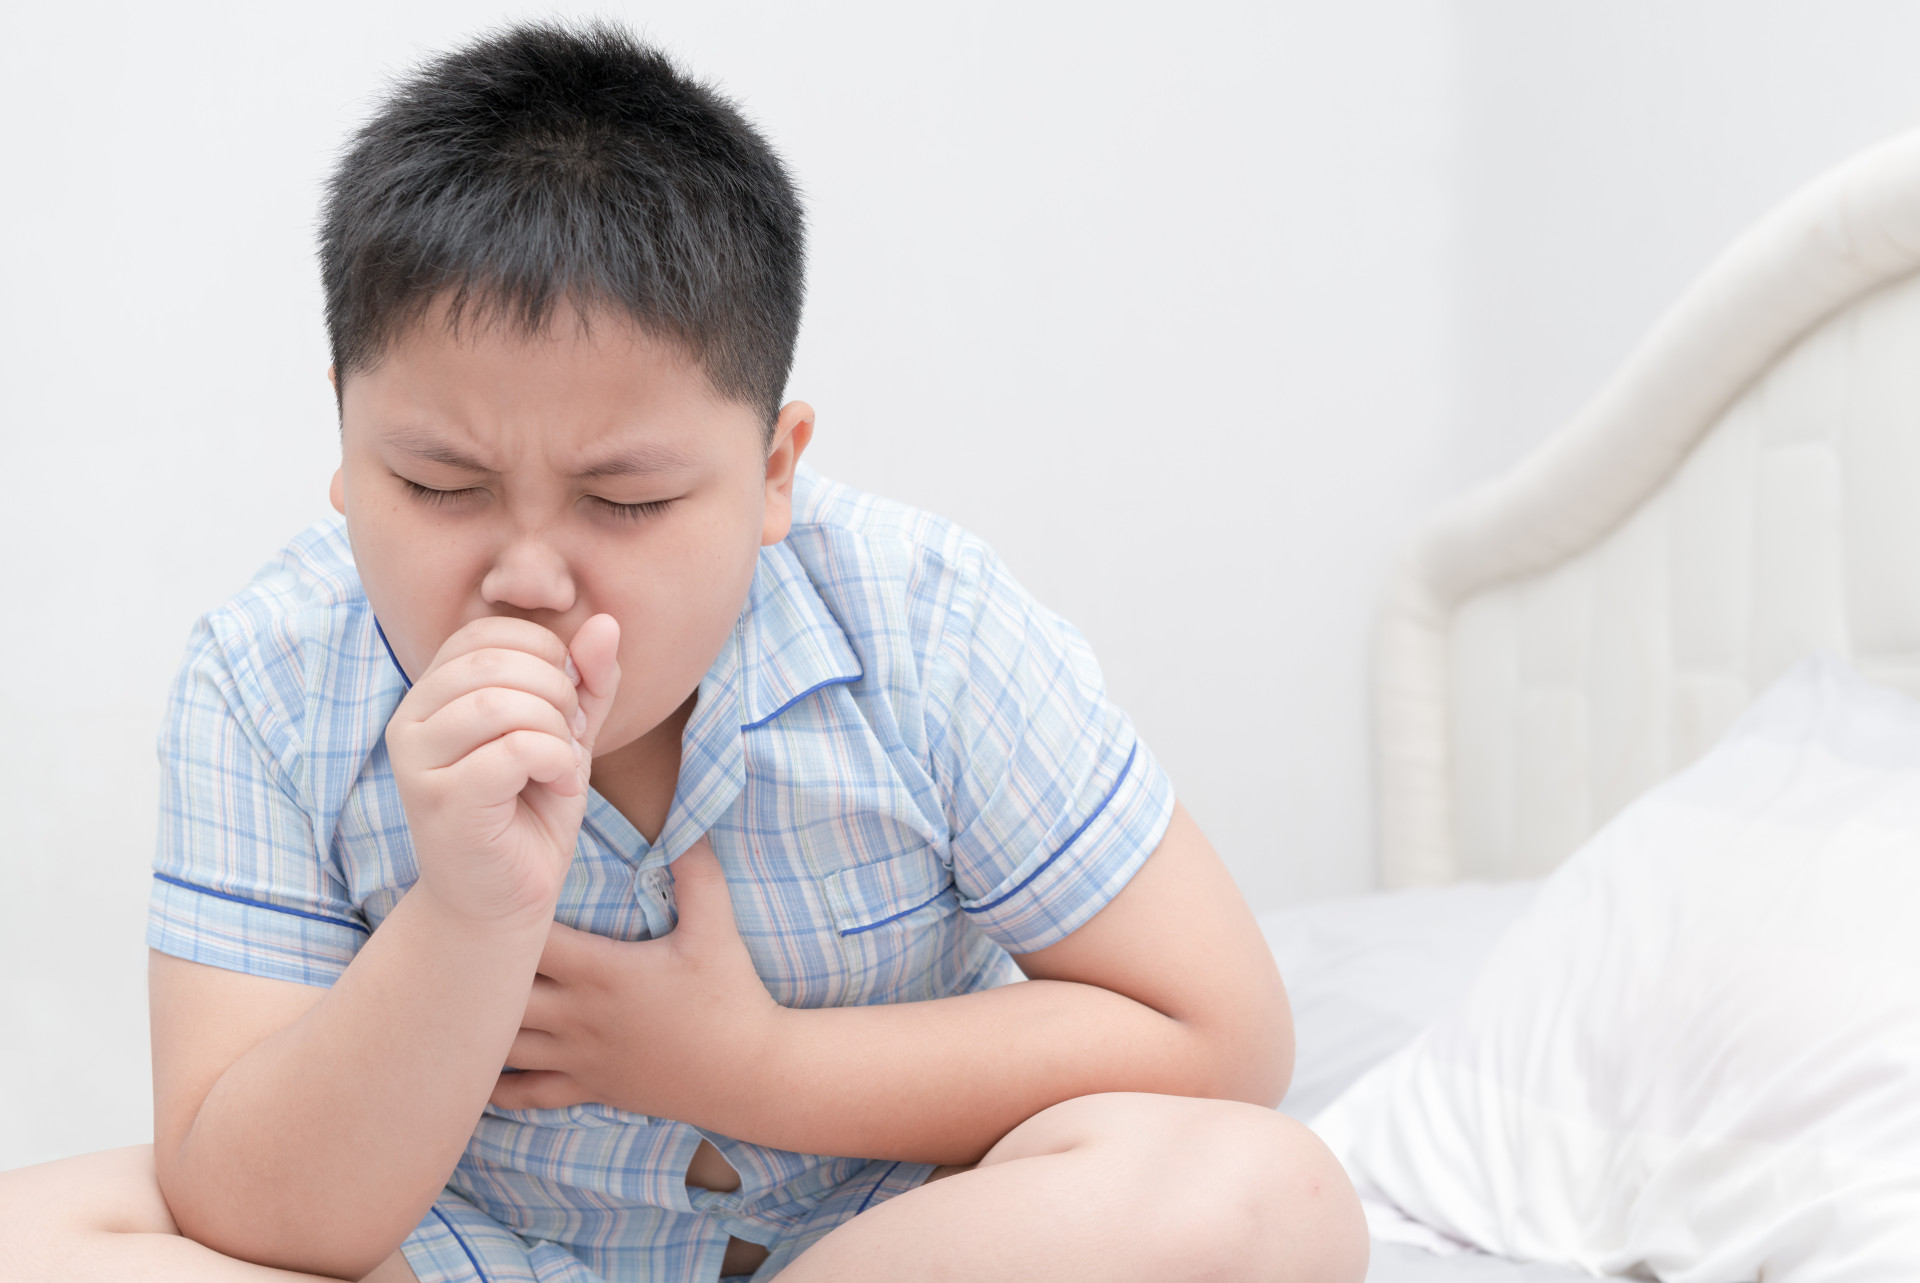 <p>The CDC also warns that obese kids may display breathing problems like asthma or sleep apnea.</p> <p>Kids can develop problems later on such as muscular discomfort as well as liver problems, gallstones, and heartburn.</p><p><a href="https://www.msn.com/en-us/community/channel/vid-7xx8mnucu55yw63we9va2gwr7uihbxwc68fxqp25x6tg4ftibpra?cvid=94631541bc0f4f89bfd59158d696ad7e">Follow us and access great exclusive content every day</a></p>